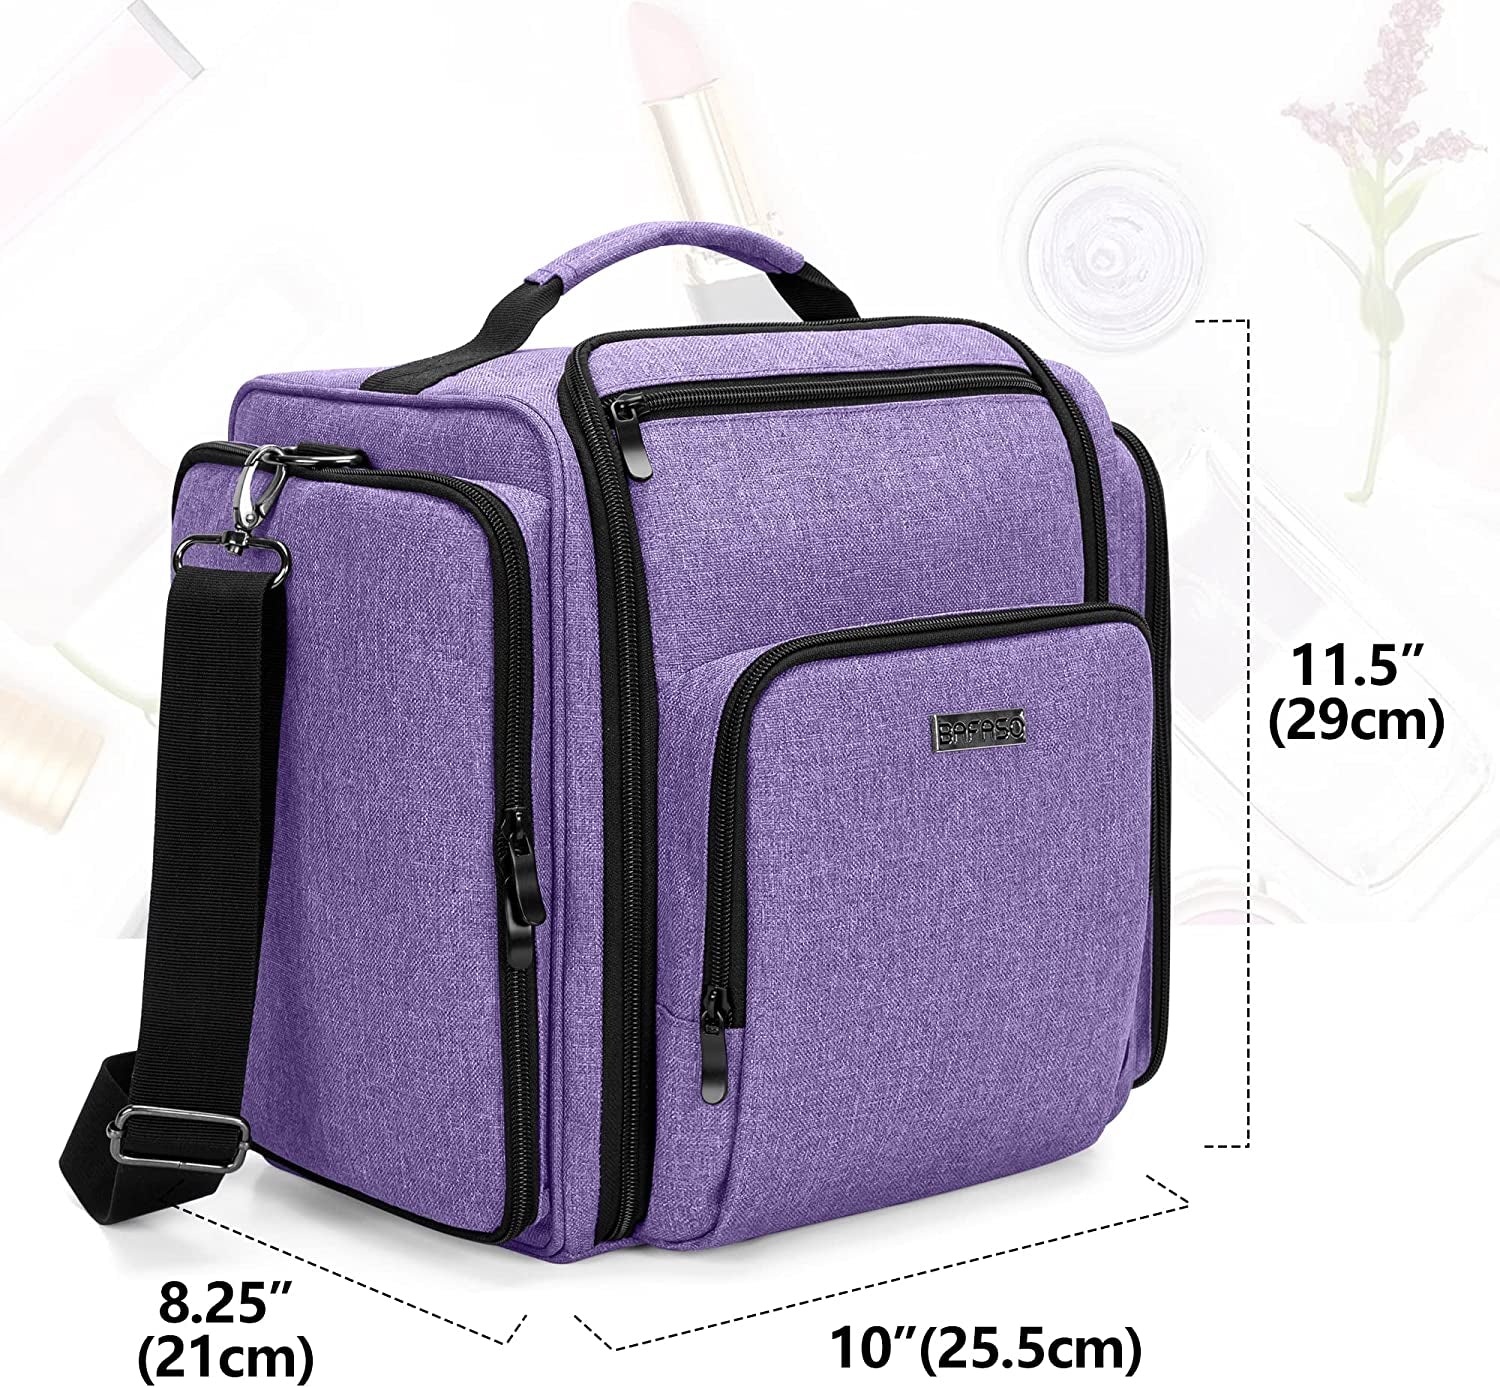 BAFASO Makeup Bag Cosmetic Bag with 4 Inner Removable Pouches, Multifunctional Travel Makeup Case (Patent Pending), Purple